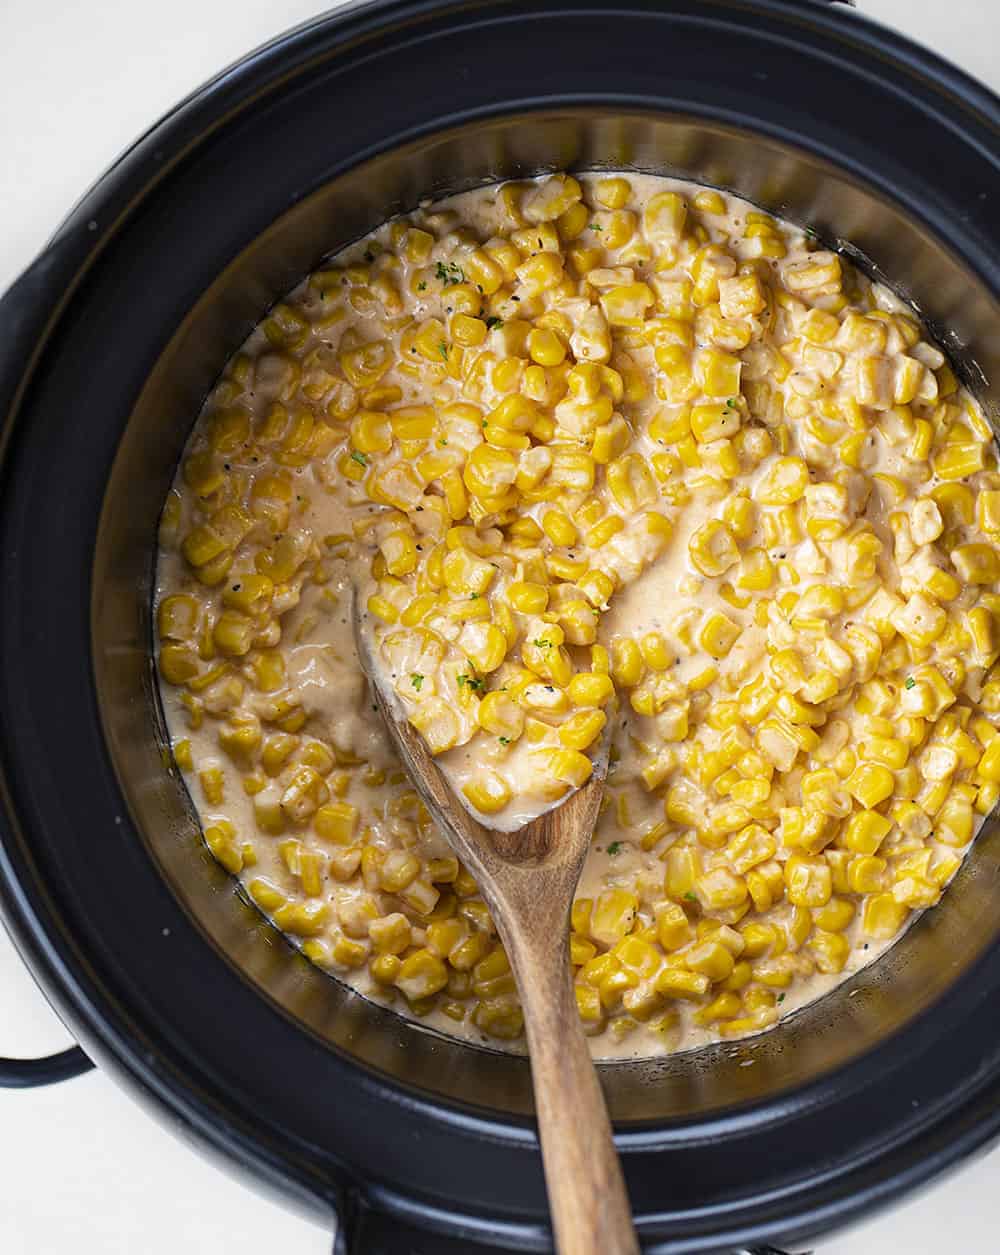 Completed Crockpot Cheesy Corn with Spoon in It